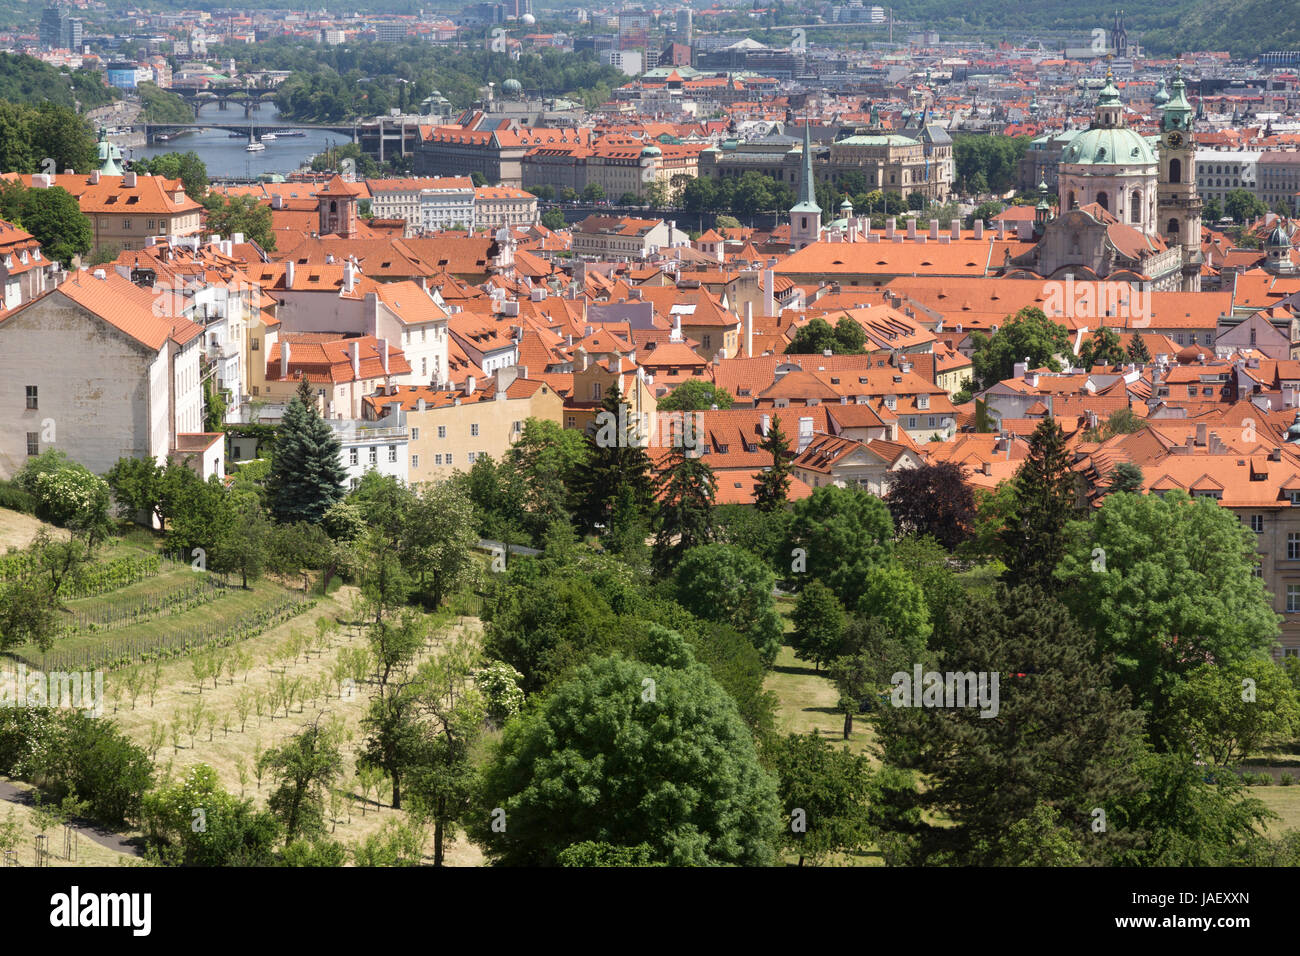 The view across Petrin Hill Park and rooftops, Prague Stock Photo